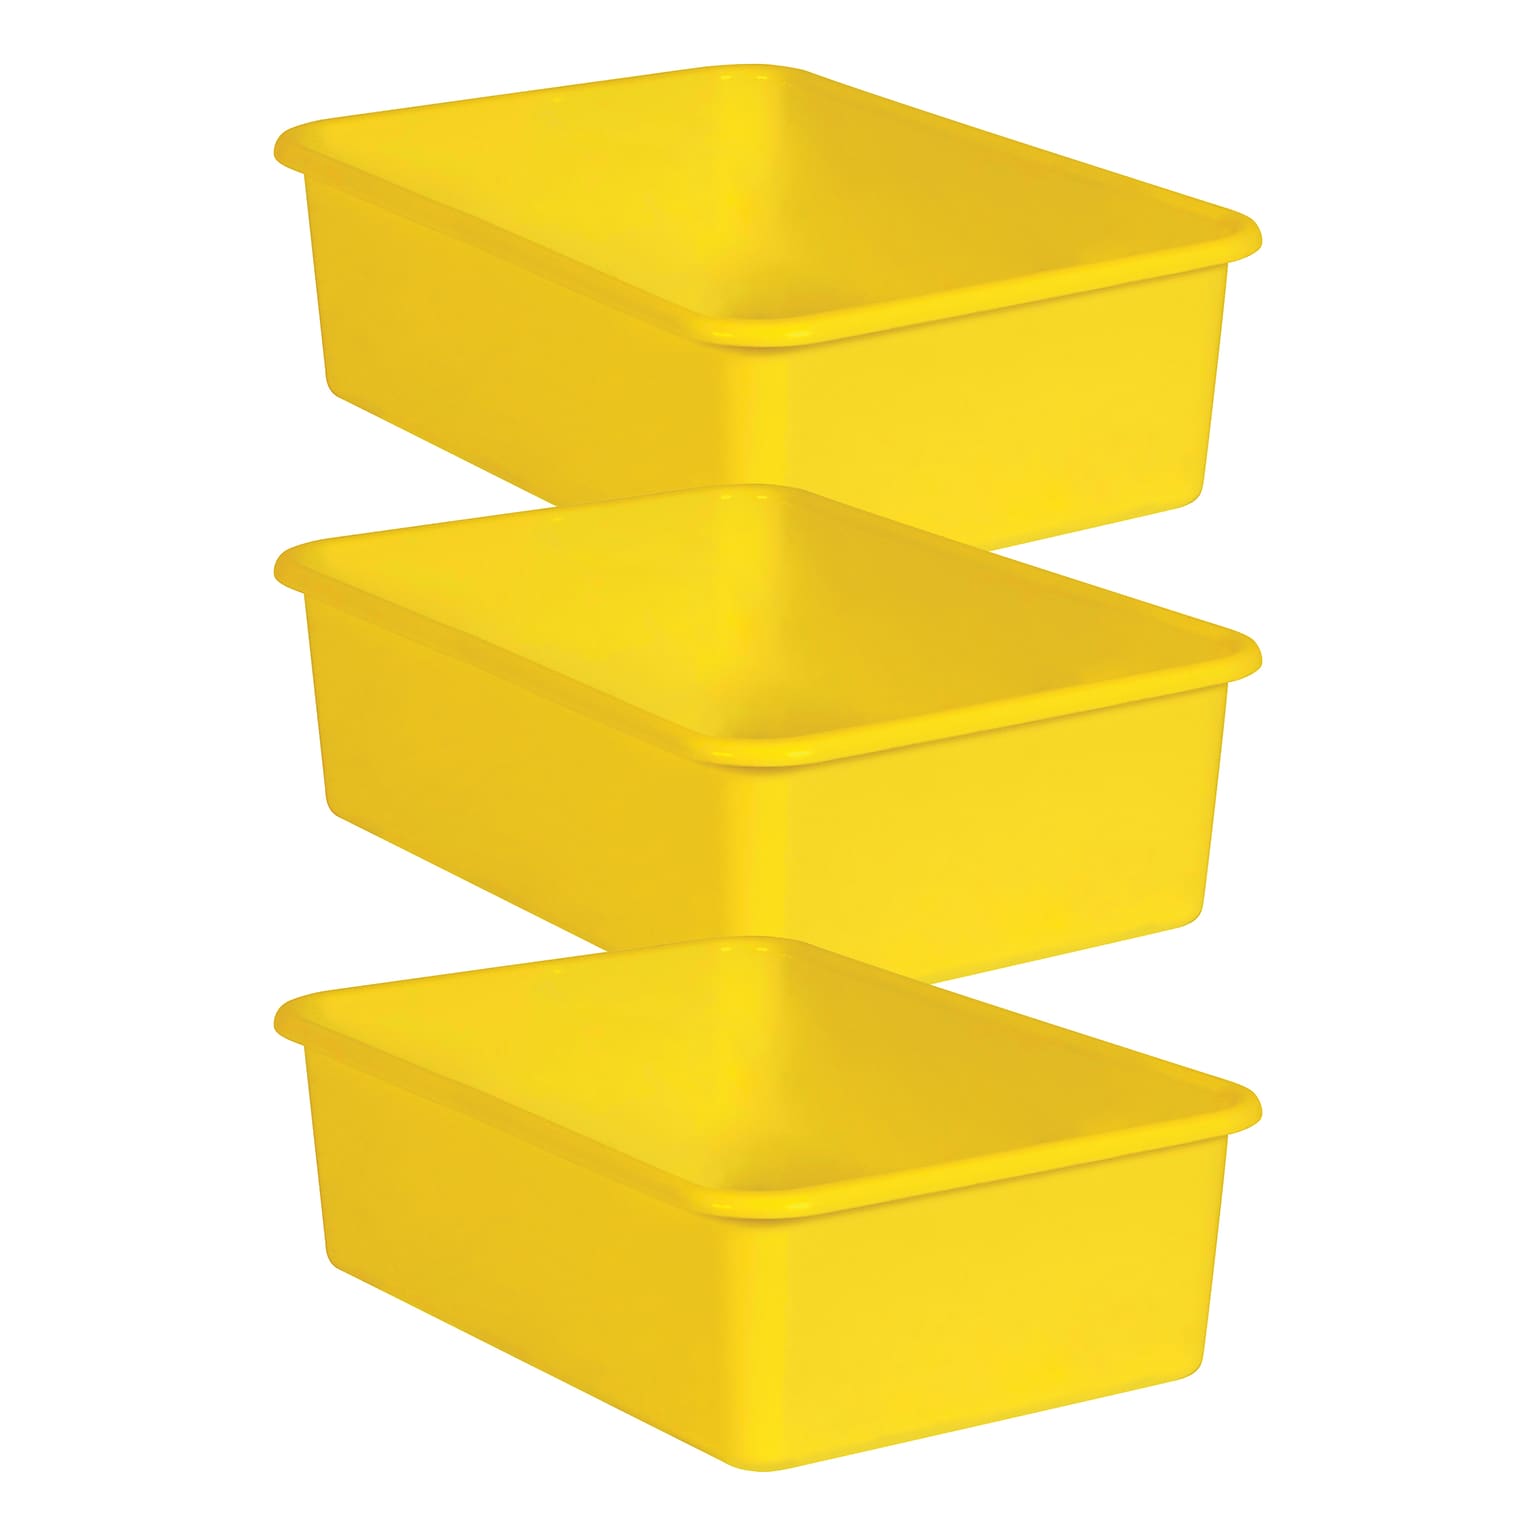 Teacher Created Resources® Plastic Storage Bin, Large, 16.25 x 11.5 x 5, Yellow, Pack of 3 (TCR20410-3)